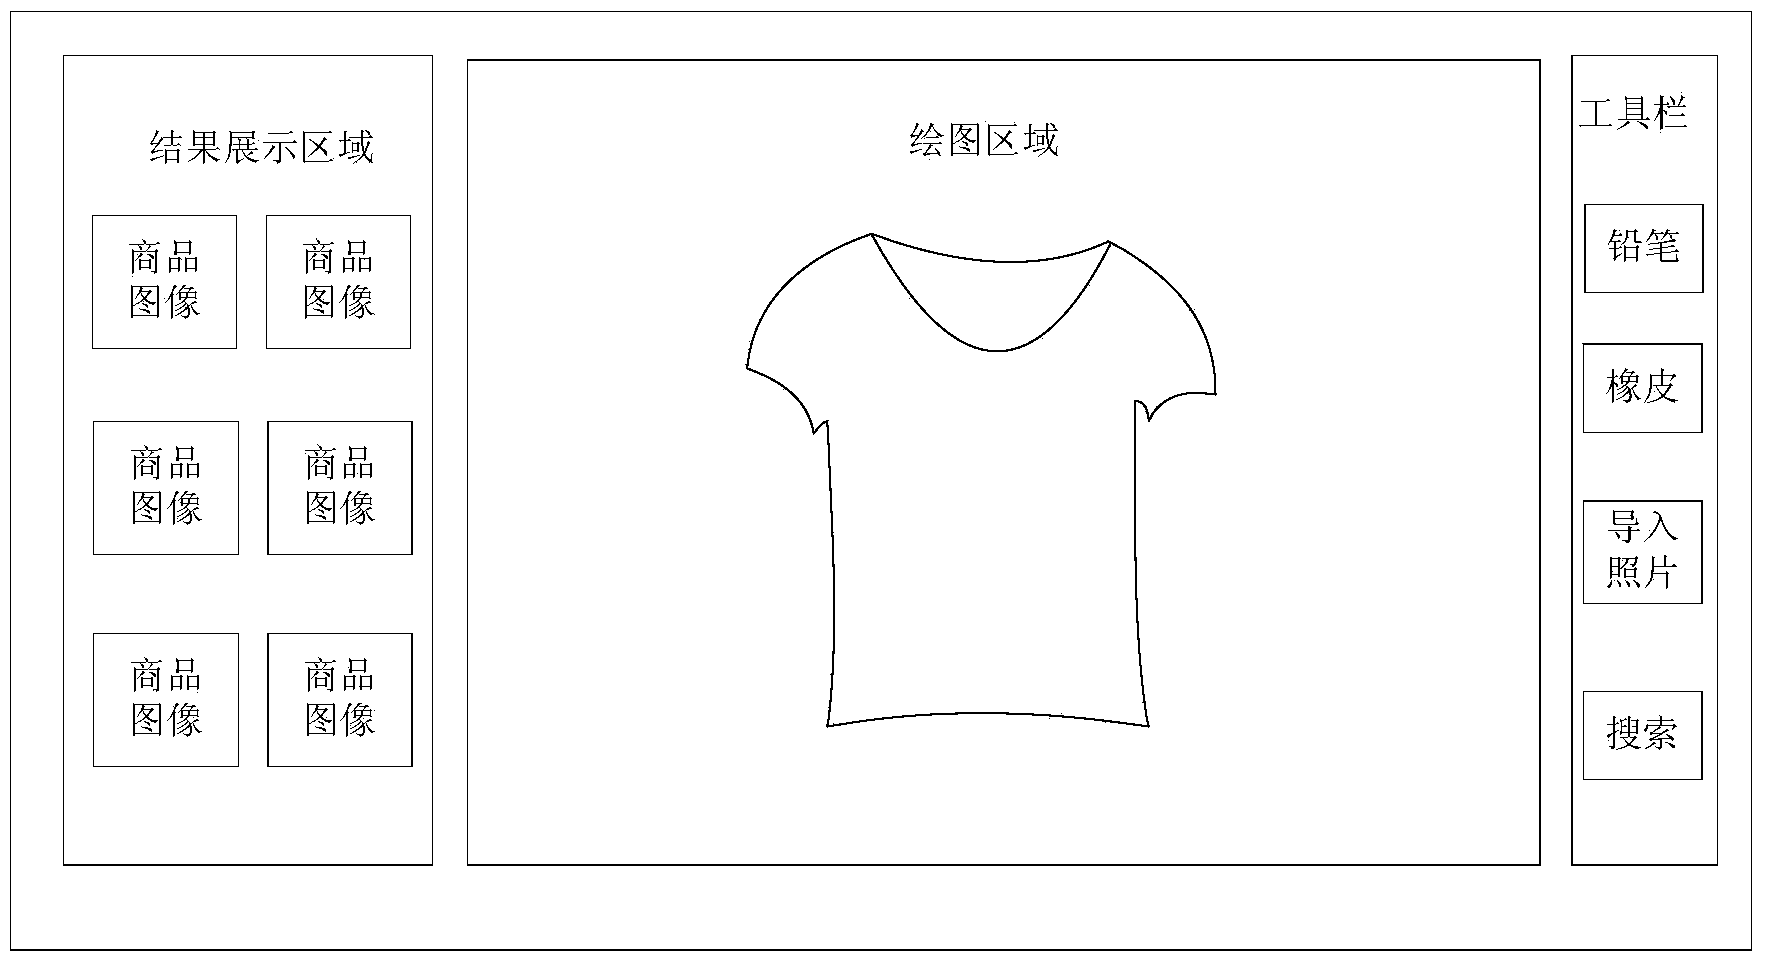 Method for searching massive clothes images in online manner on basis of stick figure interaction